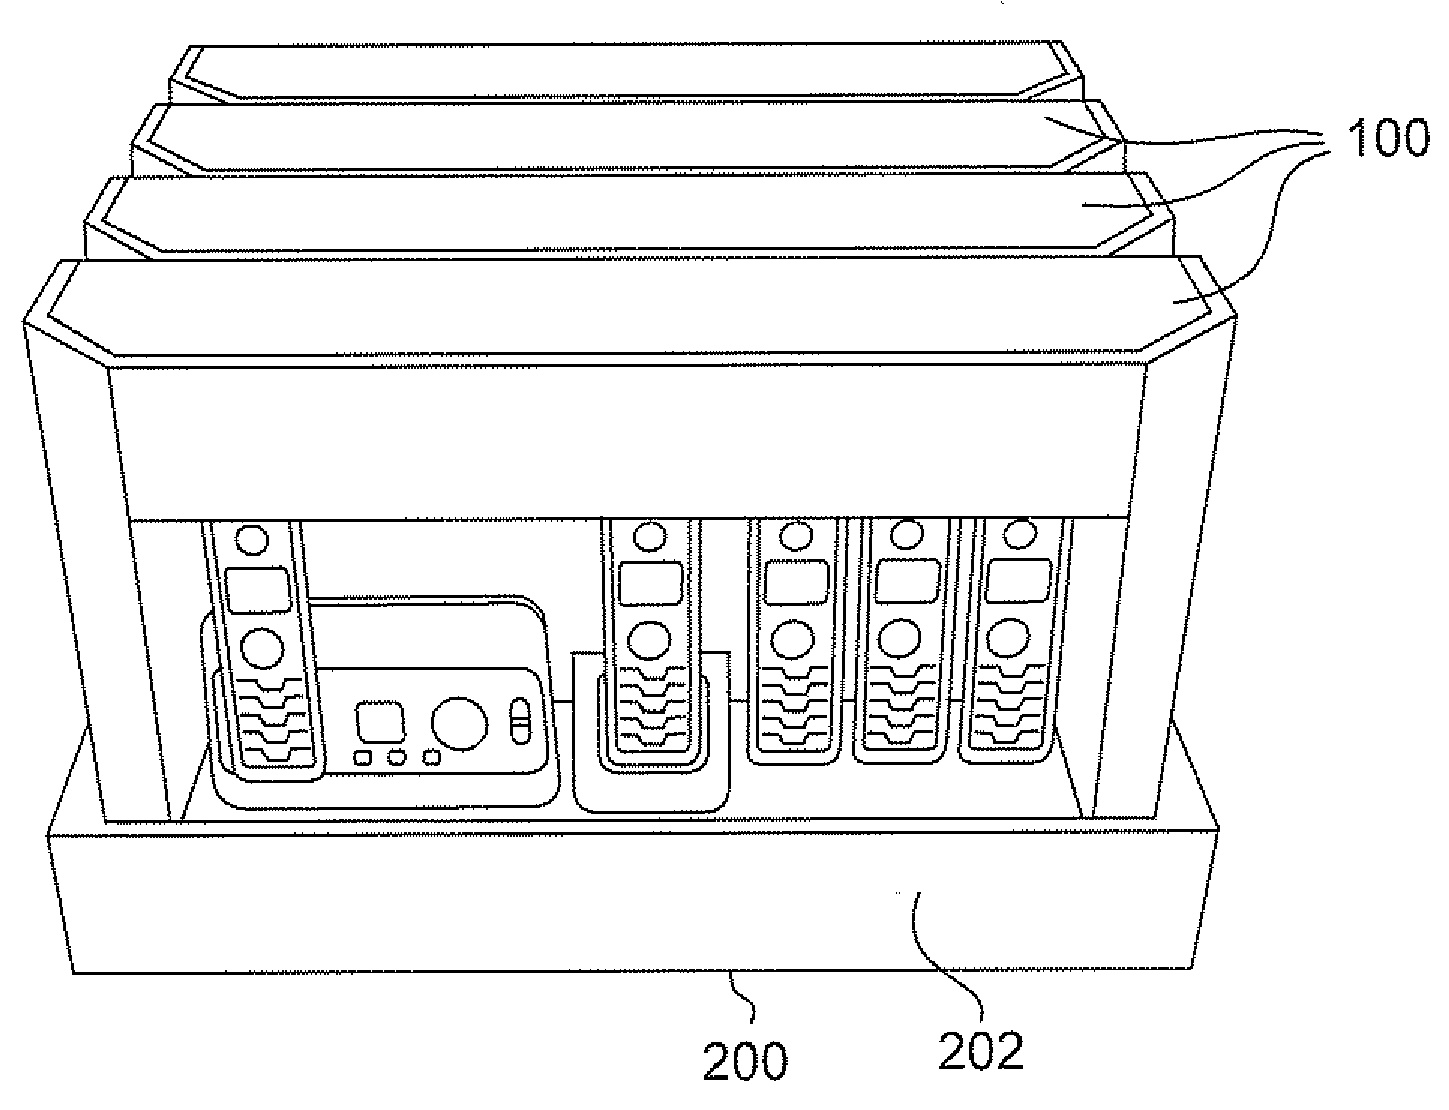 System for product packaging and display